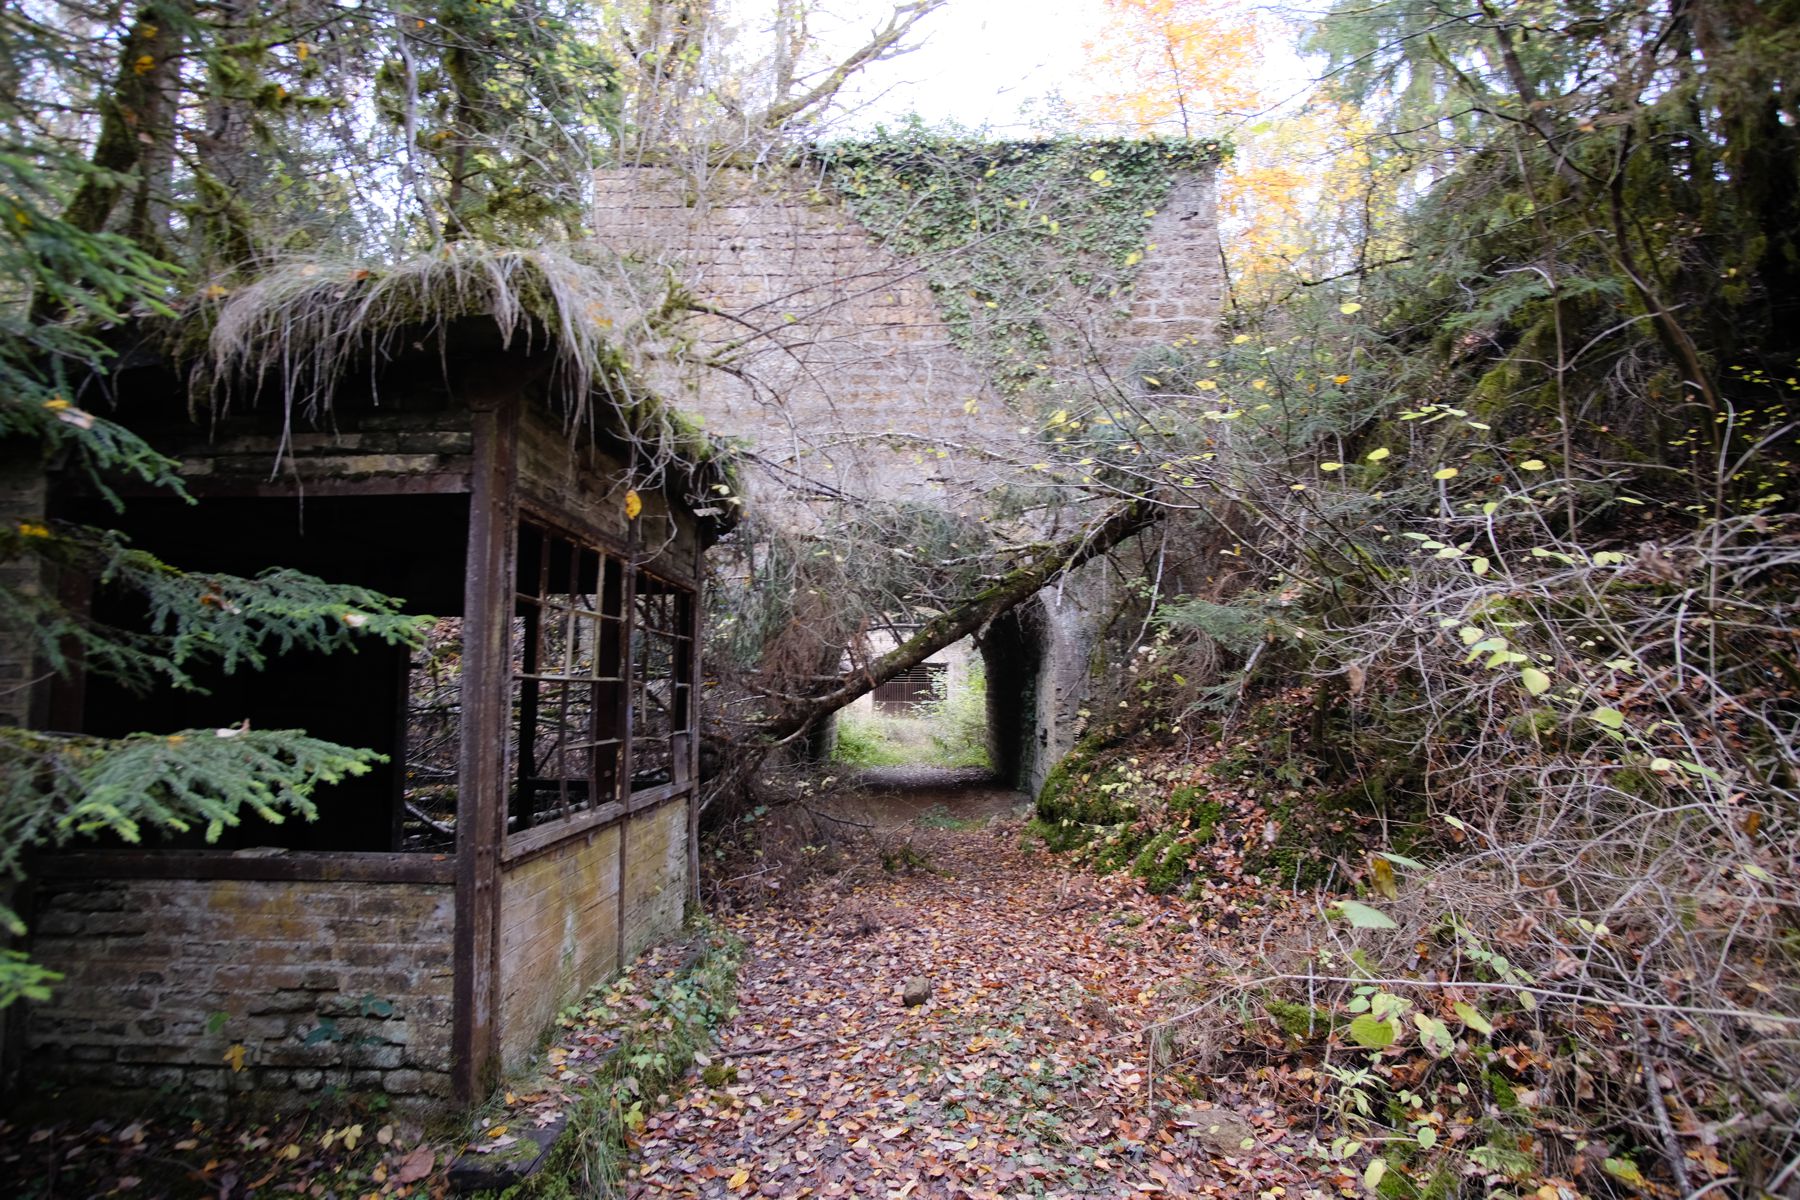 Abandoned booth on old railway line